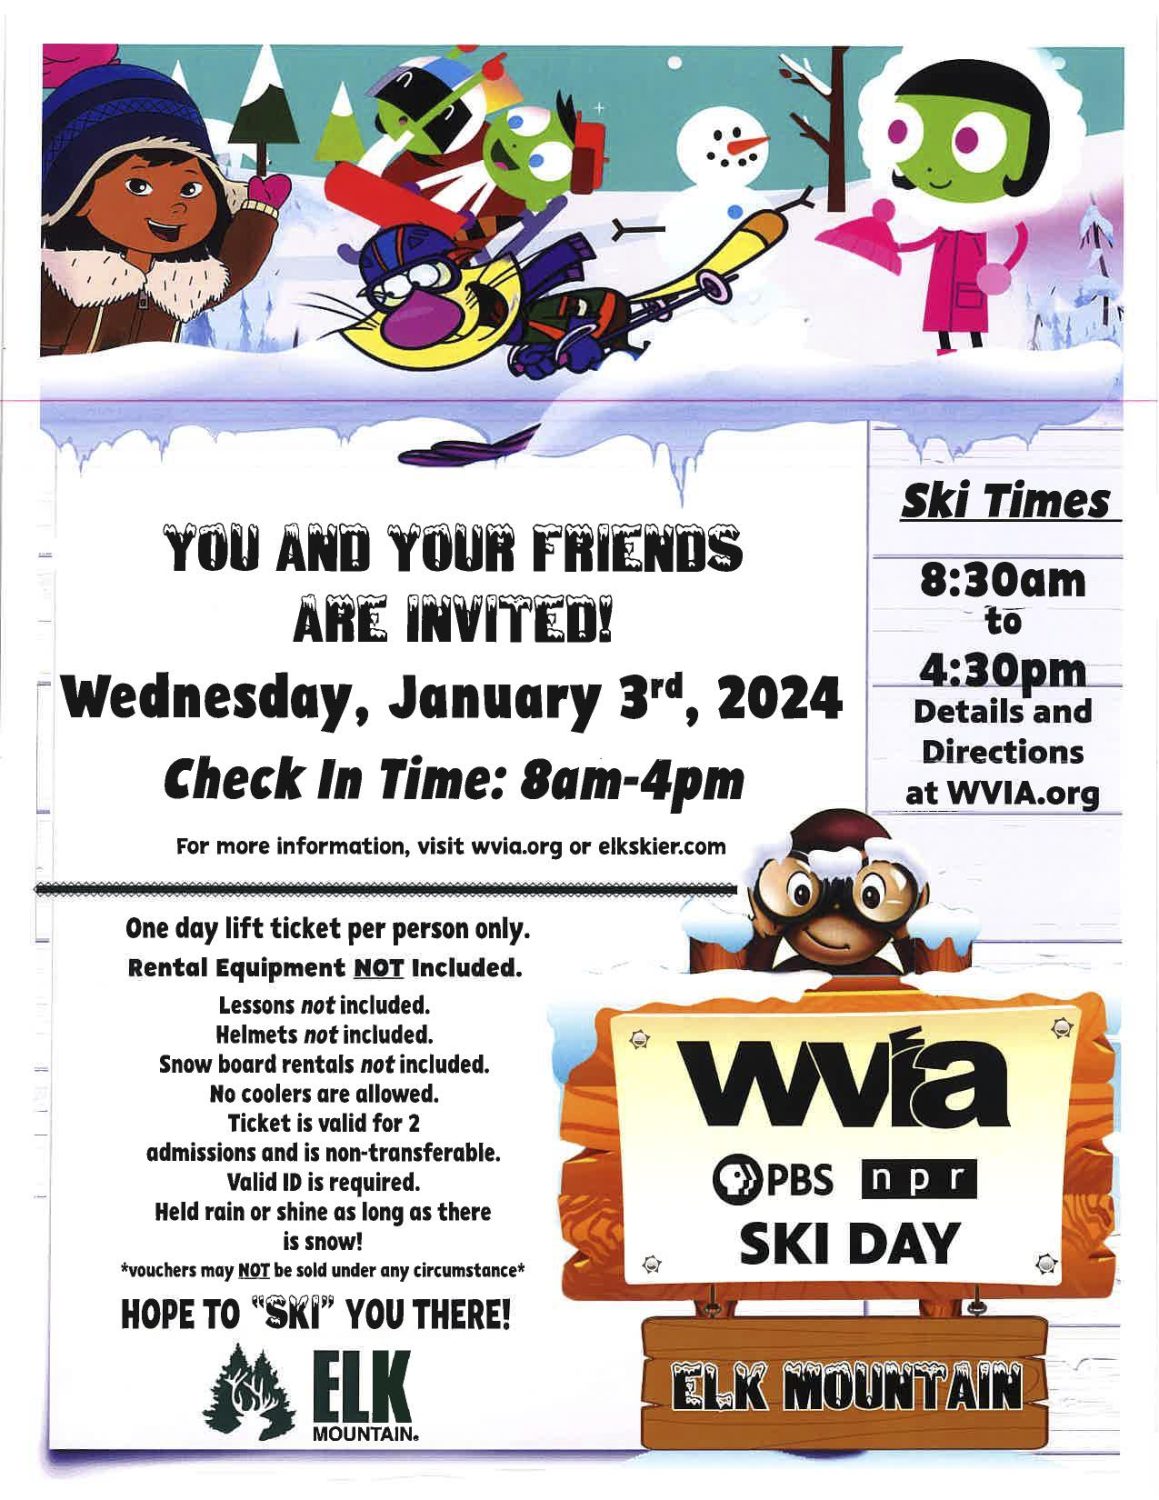 ski day flyer for wednesday, jan. 3 featuring PBS cartoon characters skiing